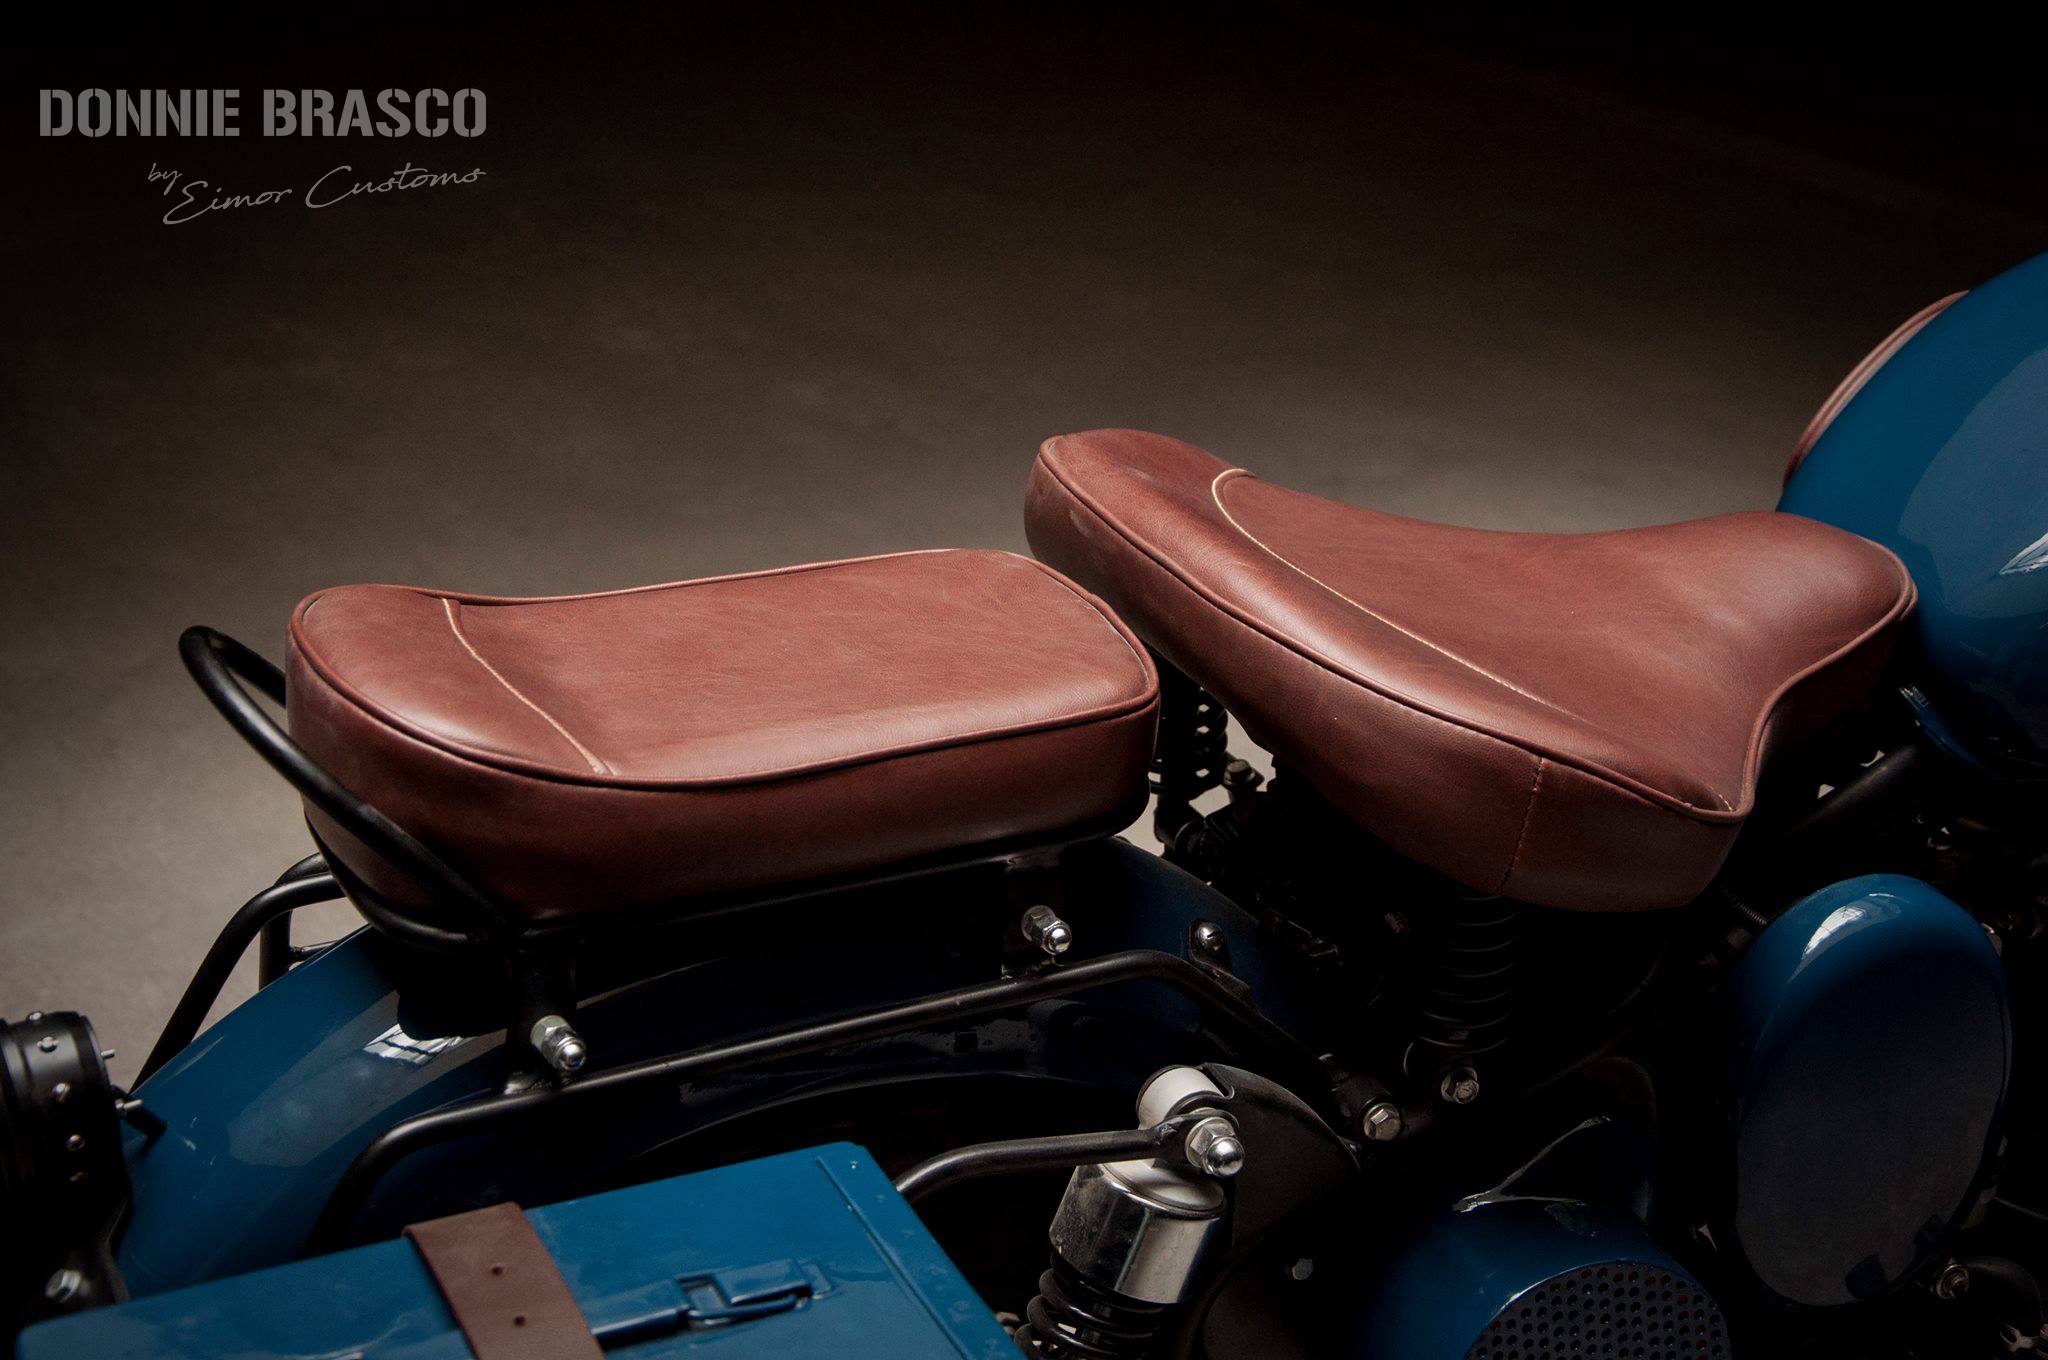 Royal Enfield Classic 'Donnie Brasco' Edition Details and Photos - left